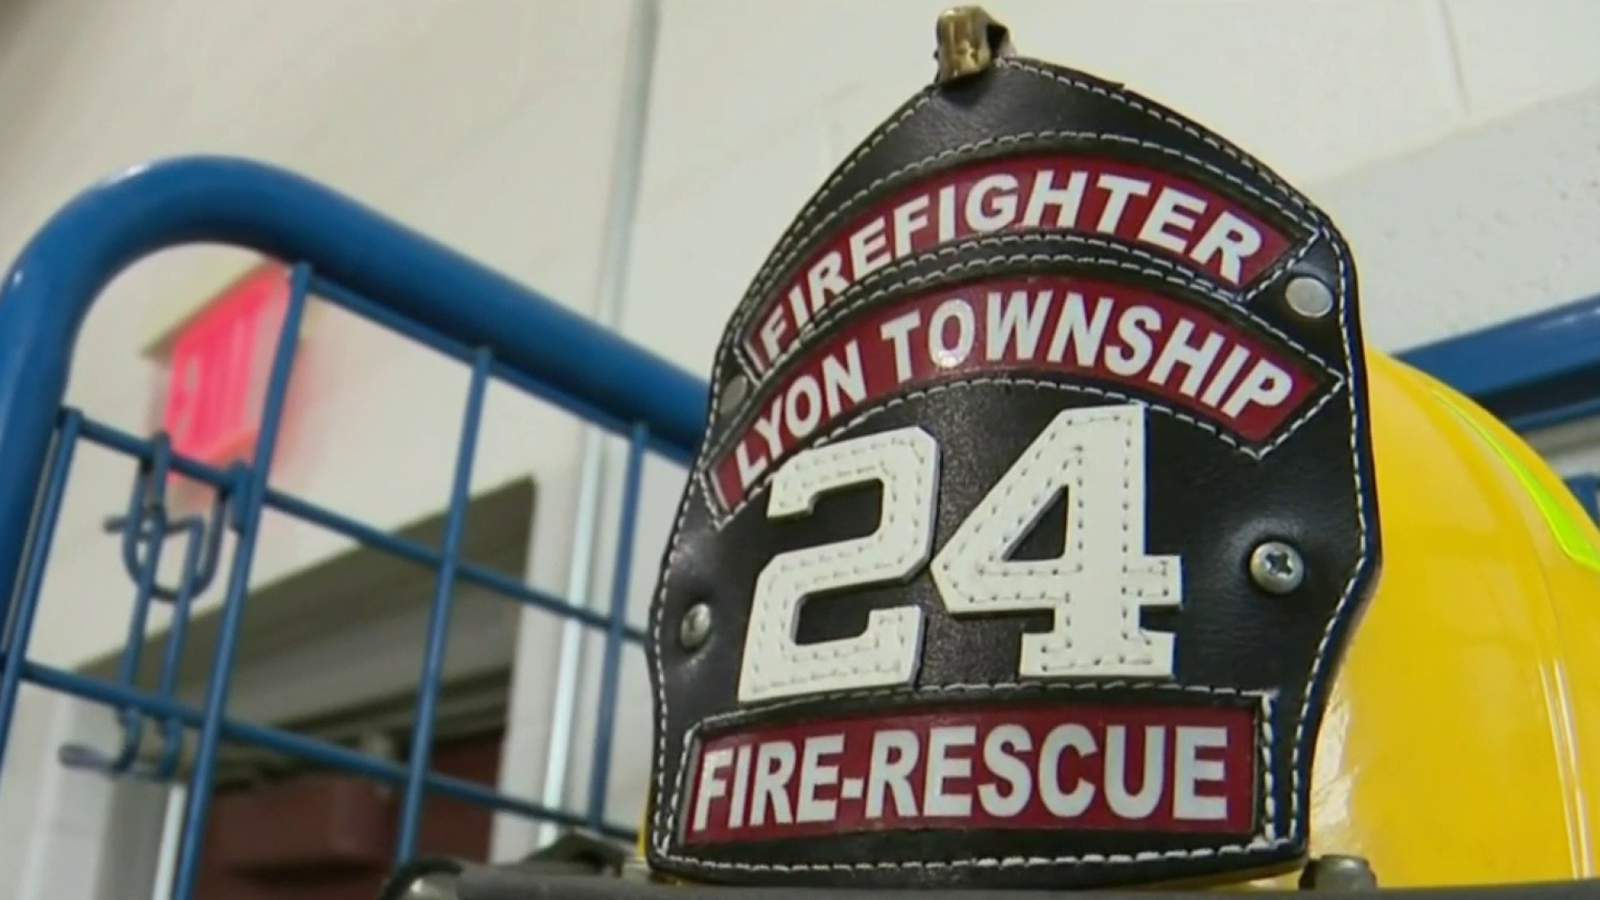 Lyon Township hires first full-time firefighters